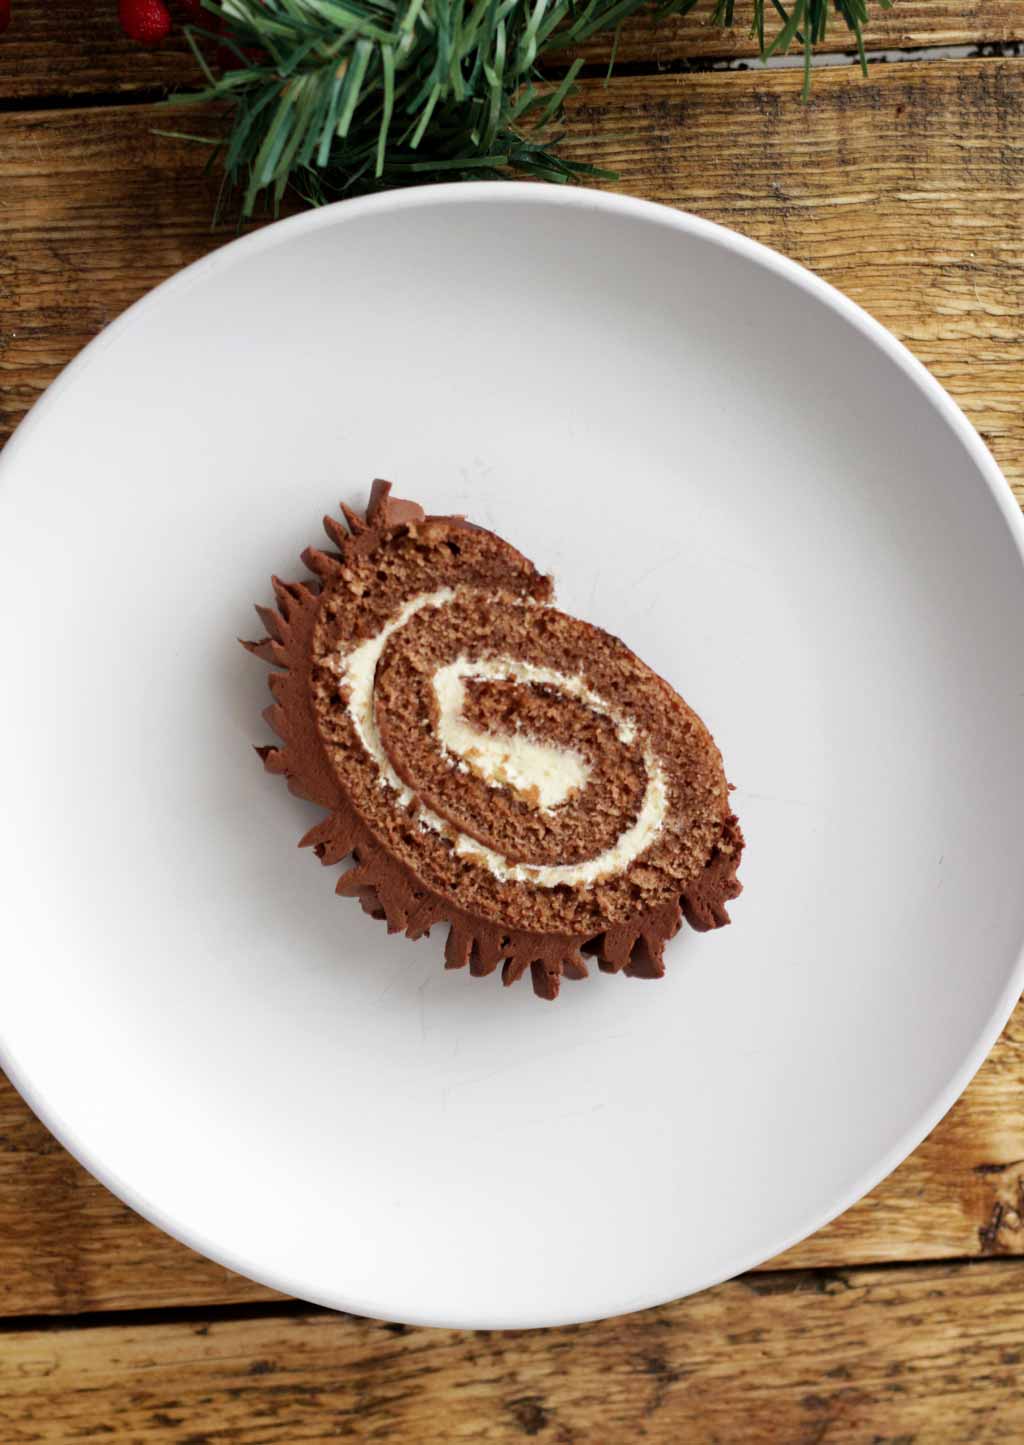 A Slice Of Yule Log On A White Plate